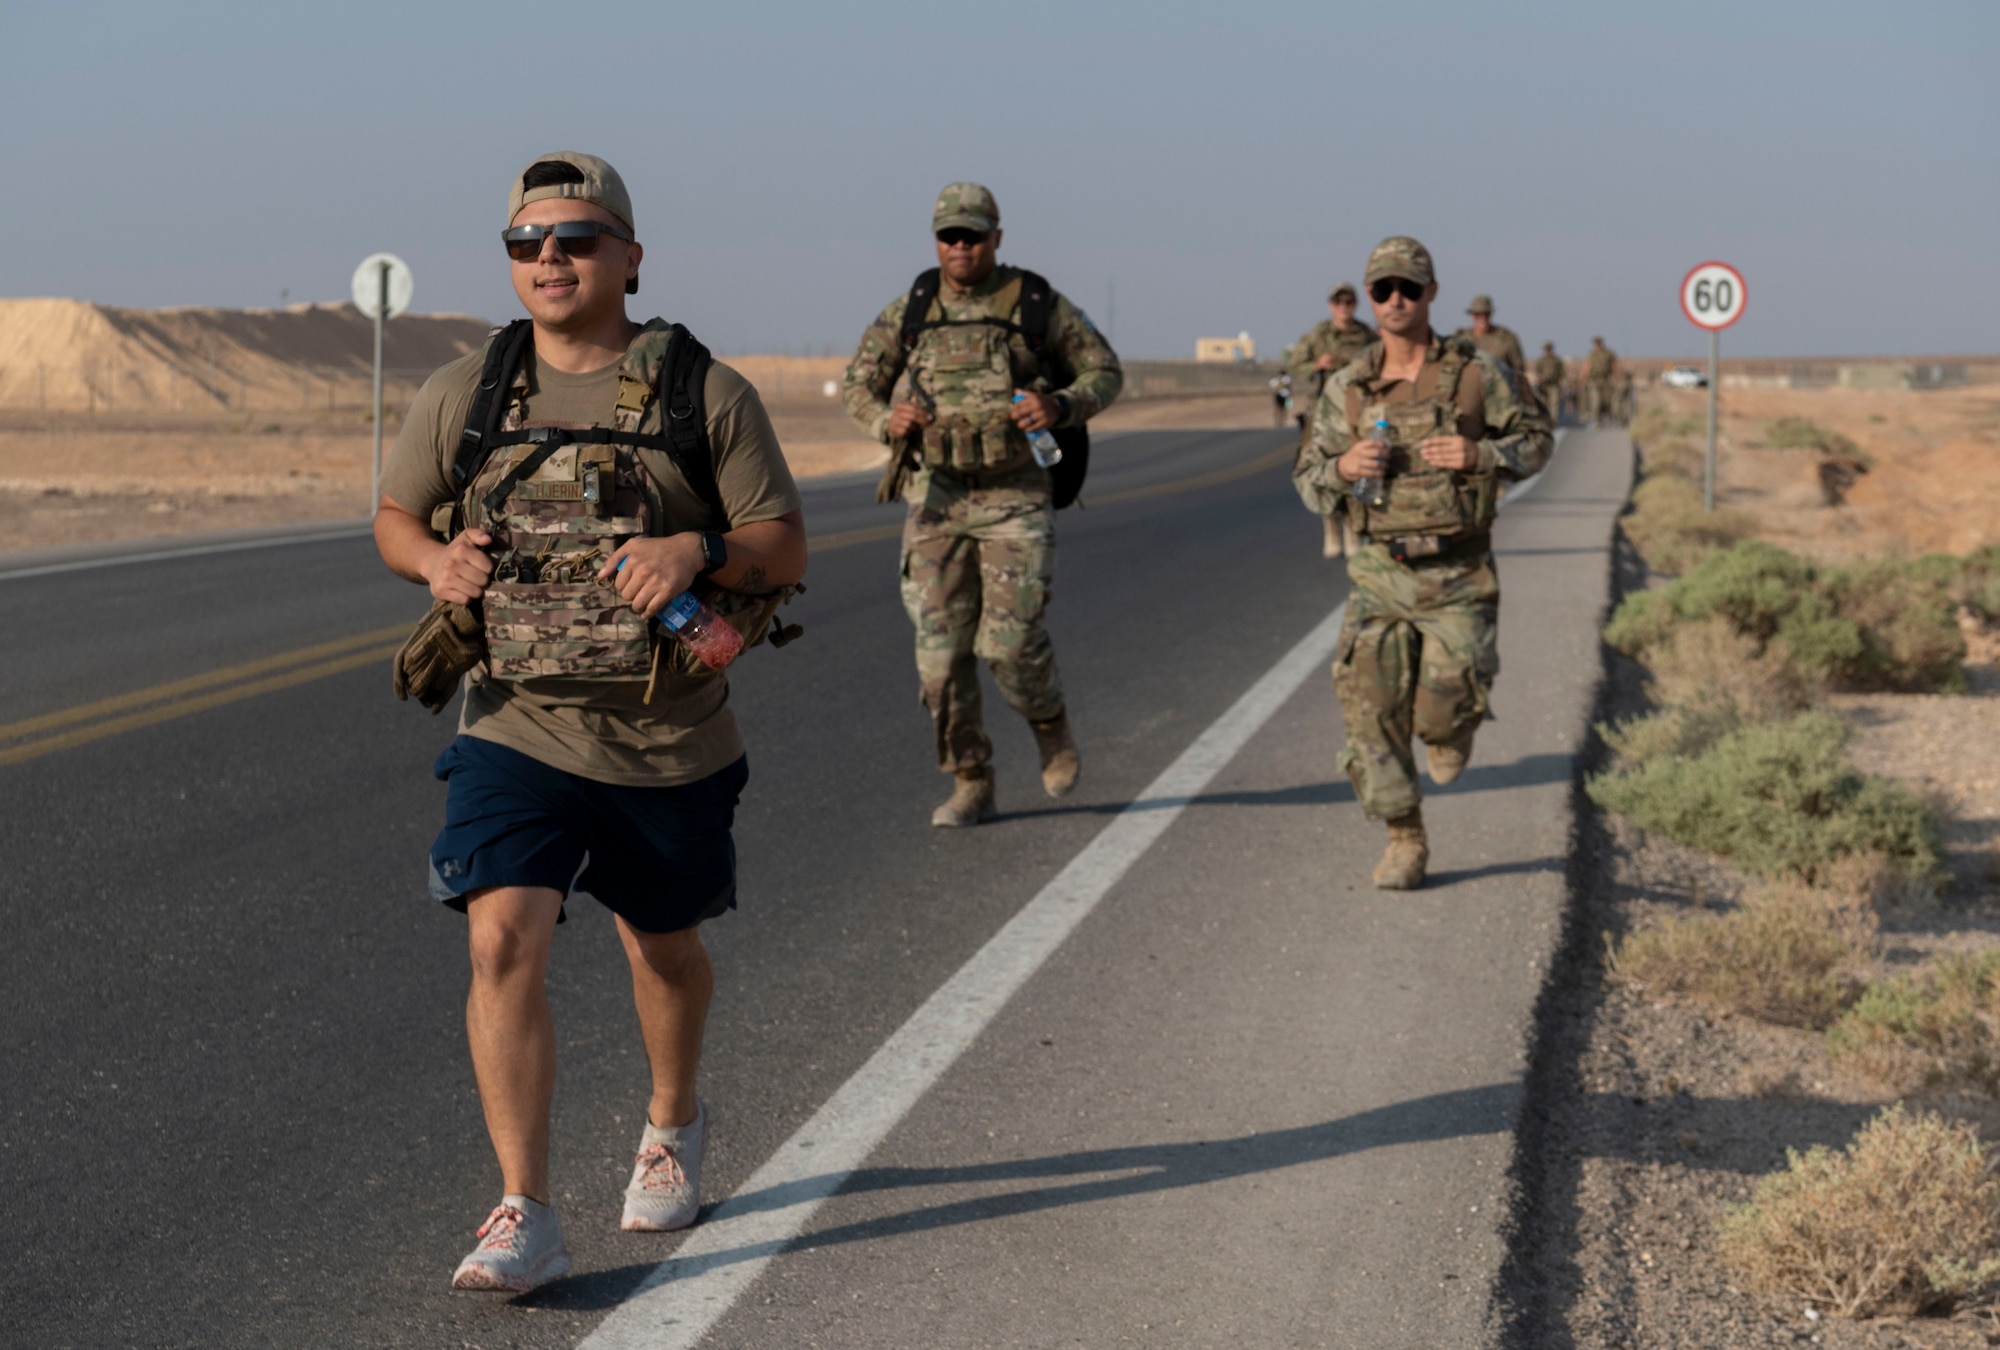 “The Red Tail Defenders Association launched a 31 mile ruck to commemorate the fallen warriors from that mission” says Staff Sergeant Beatriz Munoz, 332d Security Forces Squadron, Combined Defense Operation Center Controller, who participated in the ruck. The ruck started Sunday, Aug 7th, 2022 at 0630 at the passenger terminal. The intention was to ruck 6.2 miles Sunday through the following Thursday. Participants were highly encouraged to wear additional weight on their bodies as those that were lost were in combat battle gear. Every morning, before each ruck, volunteers started by reading the backstory of six individuals killed during the mission and proceeded to ruck.